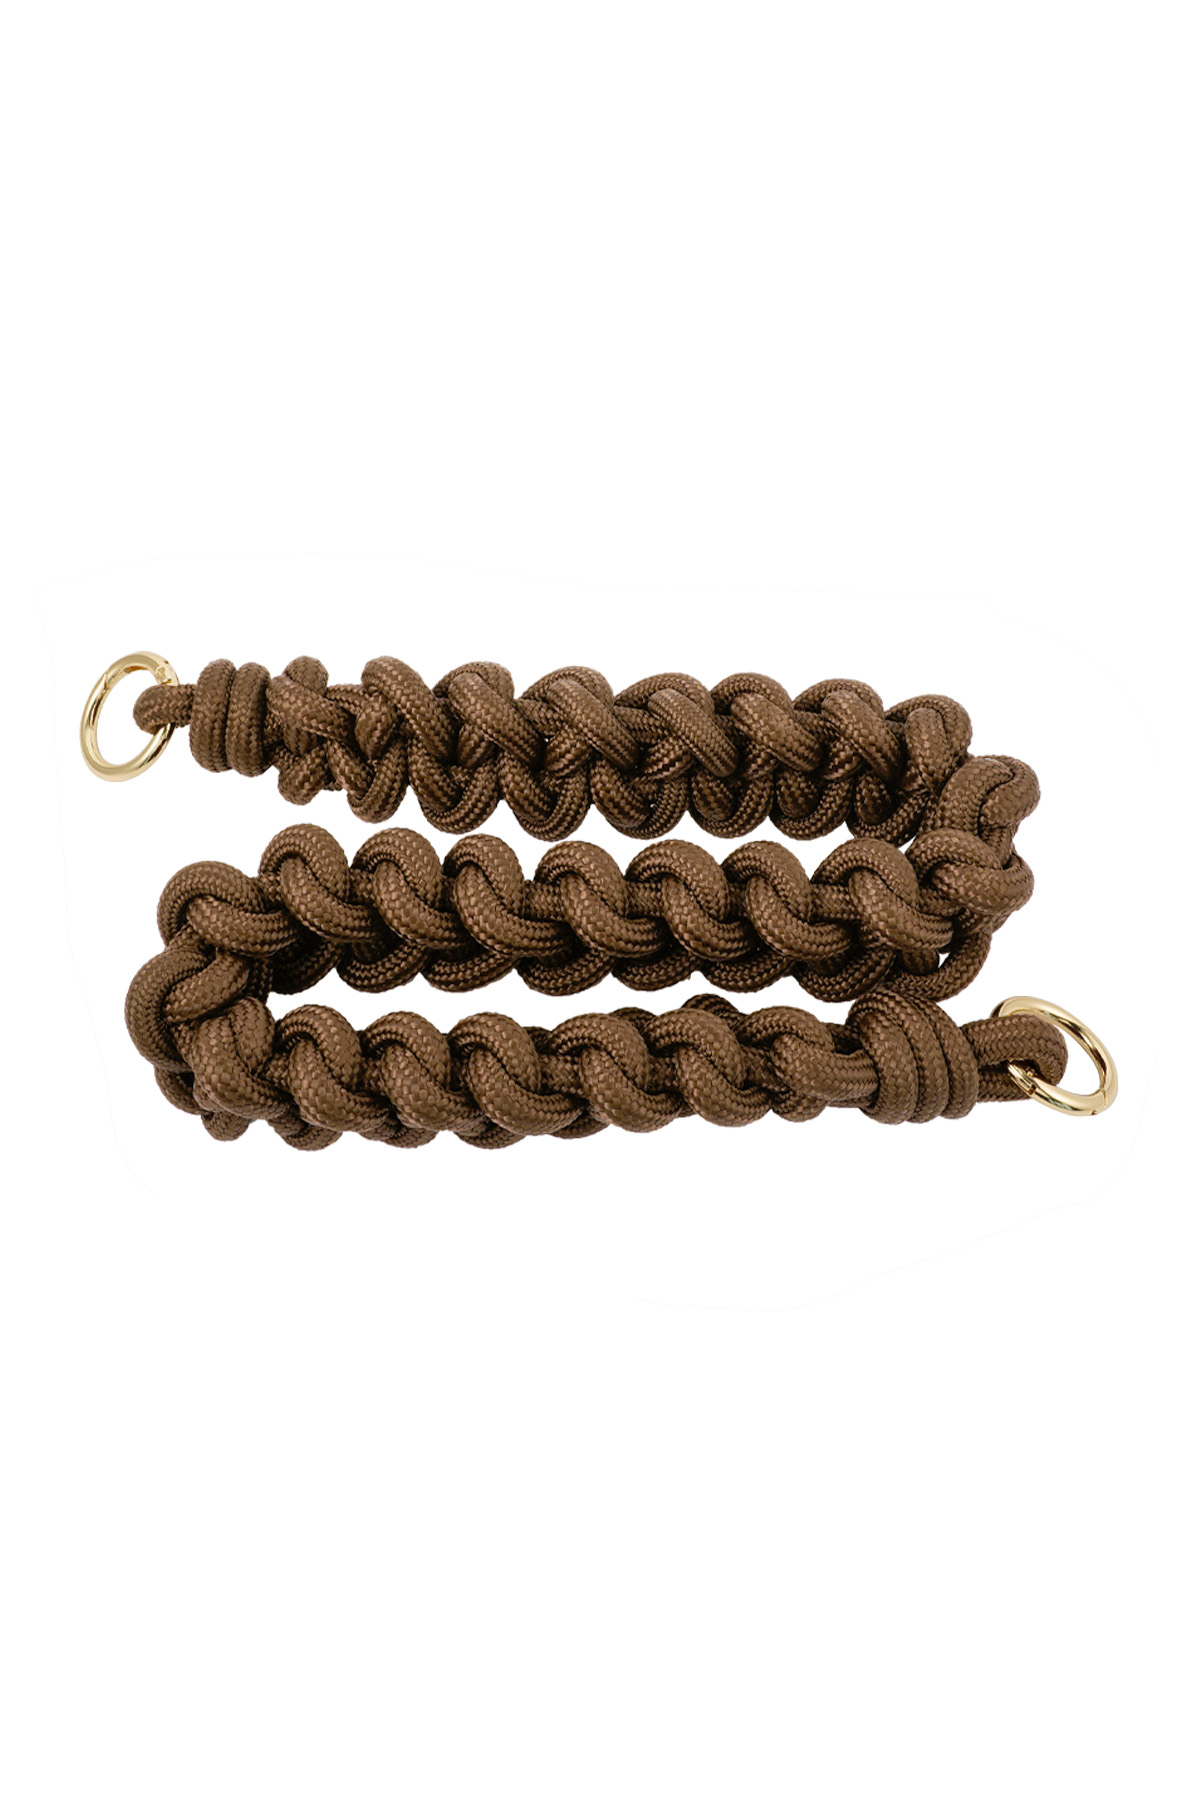 Braided bag strap brown h5 Picture5